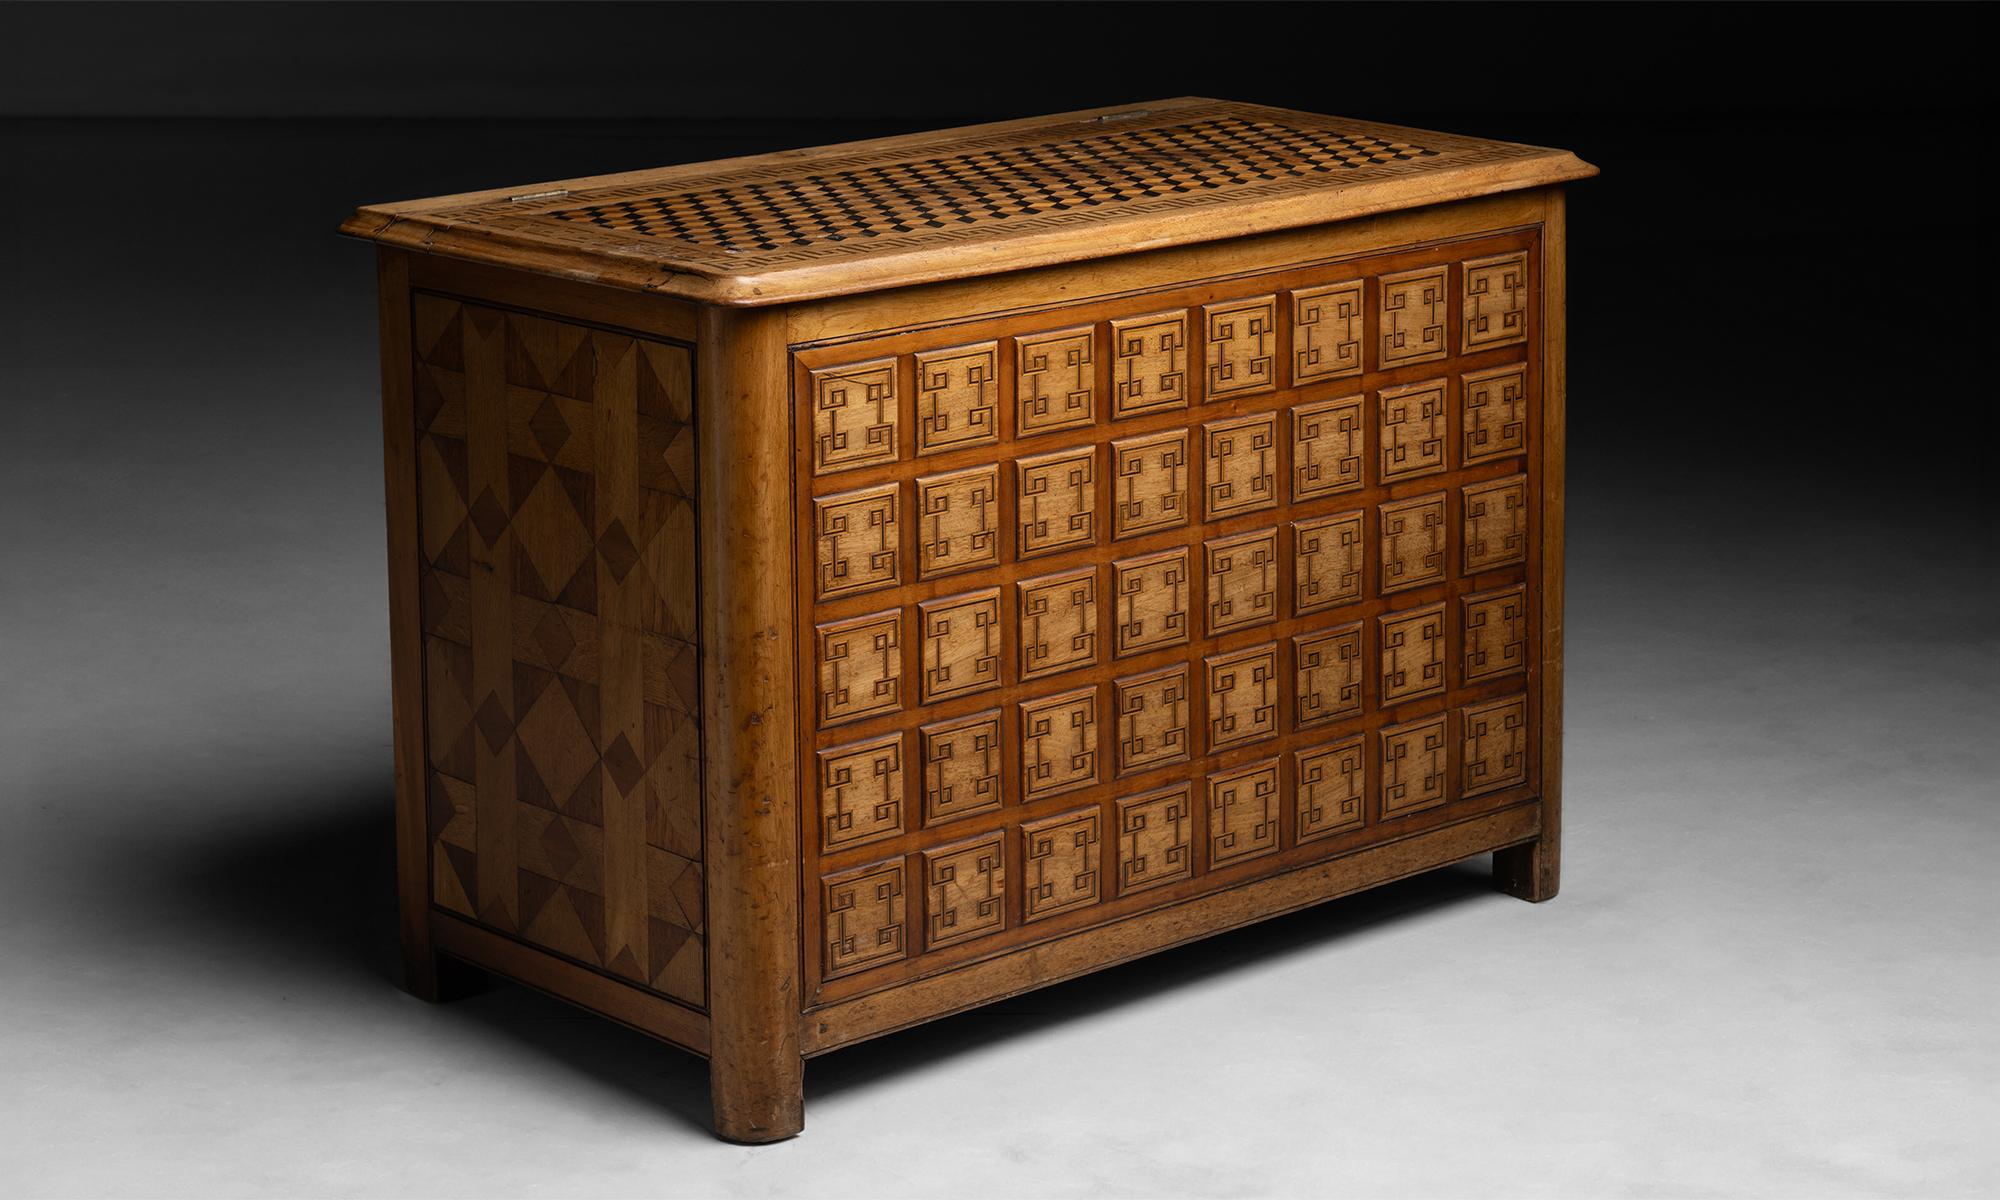 Parquetry Chest

France circa 1890

Inlaid parquetry trunk with door on top.

44”w x 23.25”d x 31”h